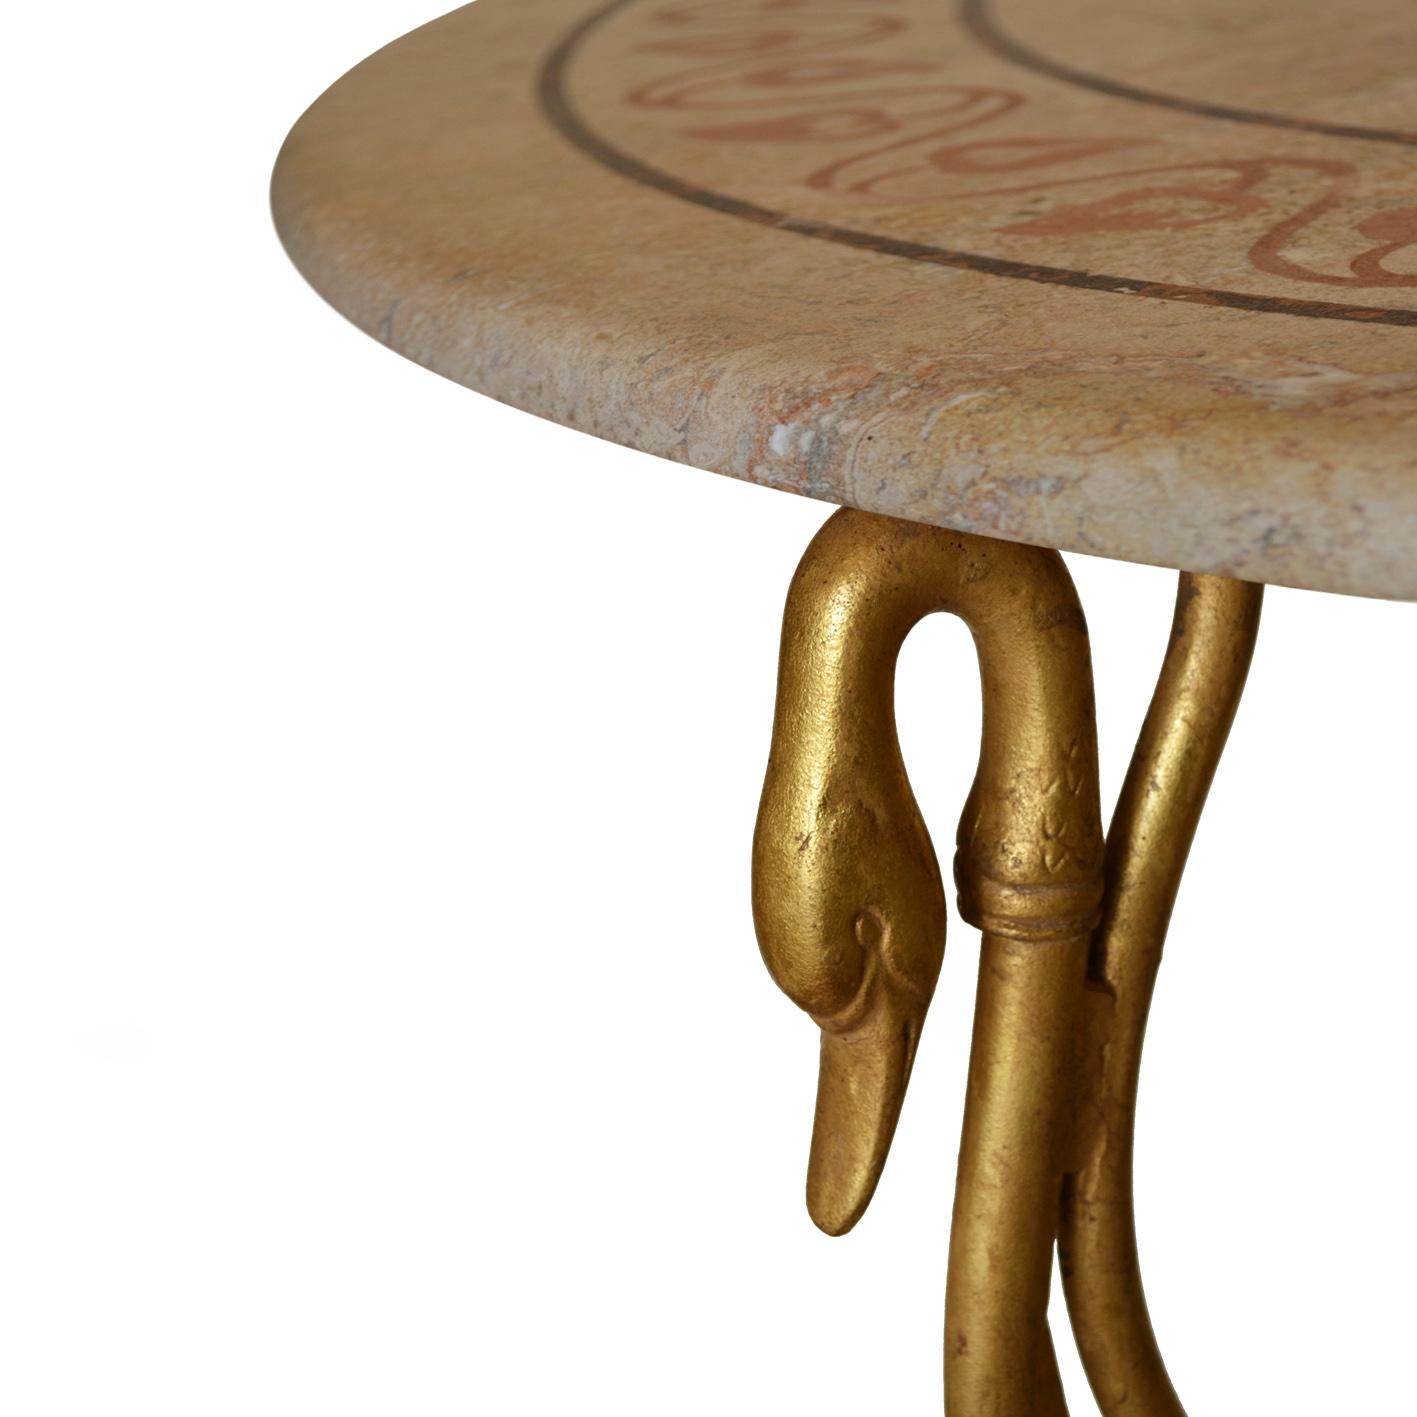 Art Nouveau Side table round travertine top gilted iron base handmade in Italy available For Sale